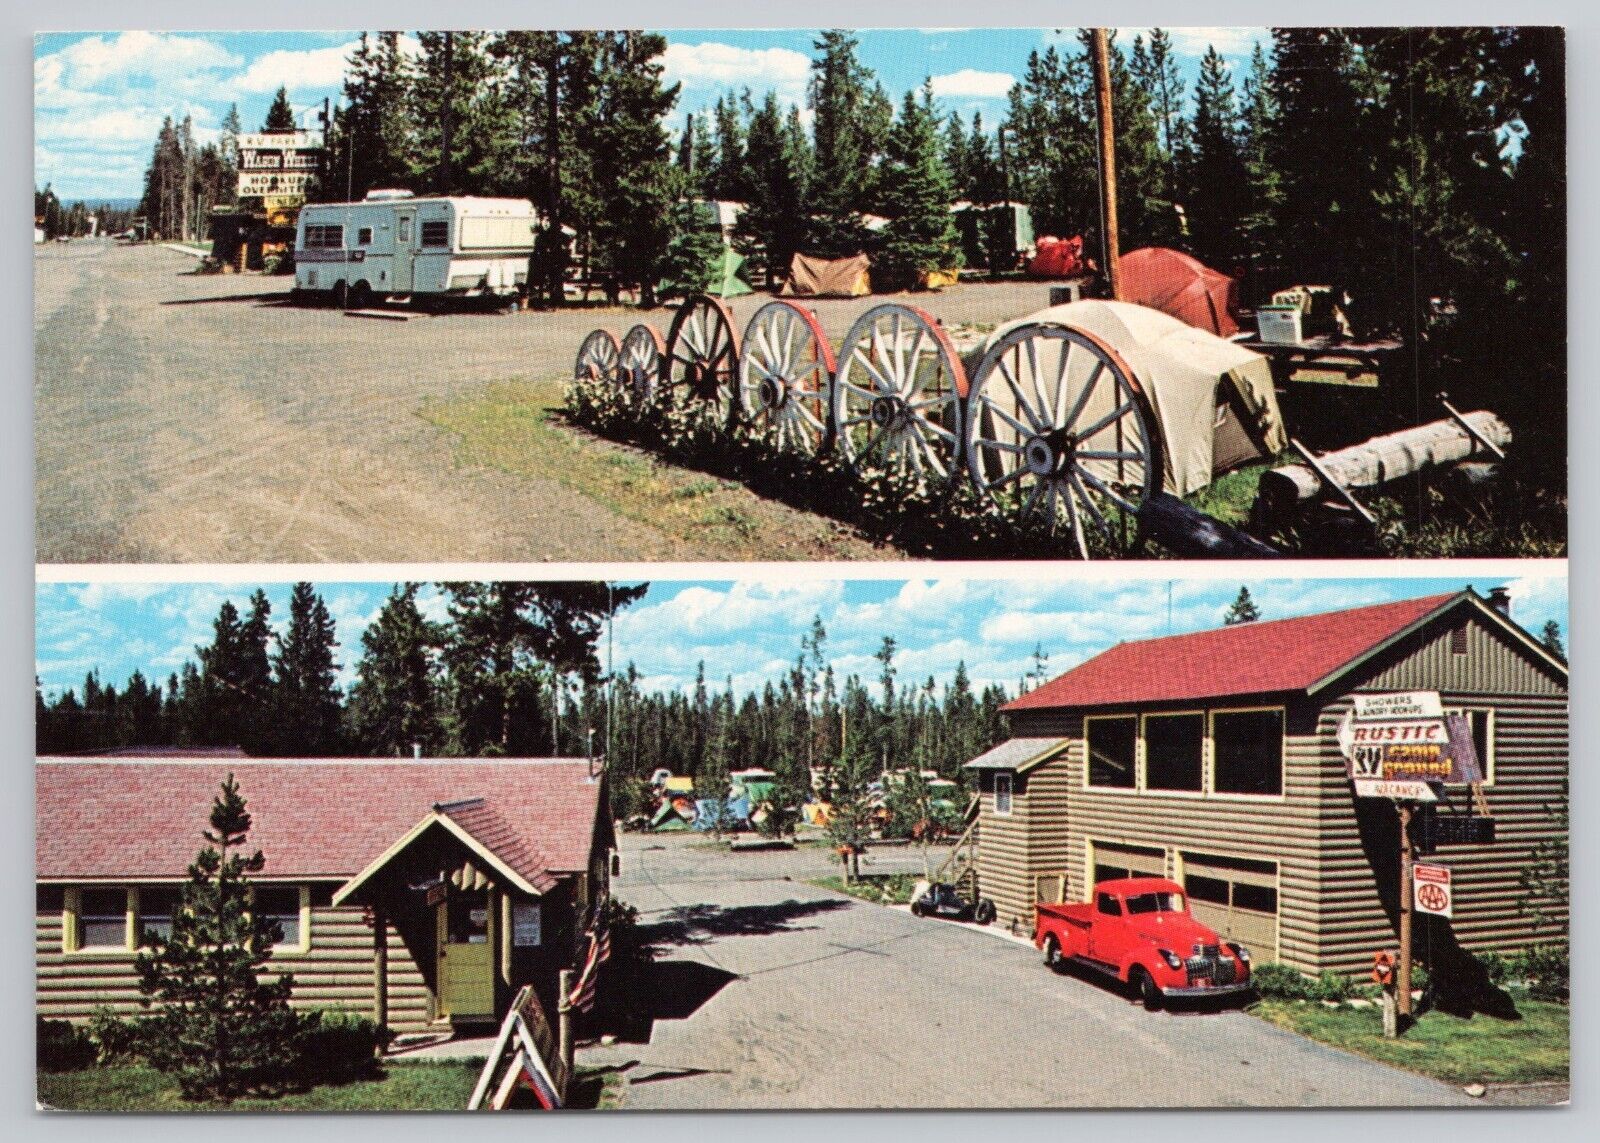 West Yellowstone Montana, Wagon Wheel & Rustic RV Campgrounds, Vintage Postcard